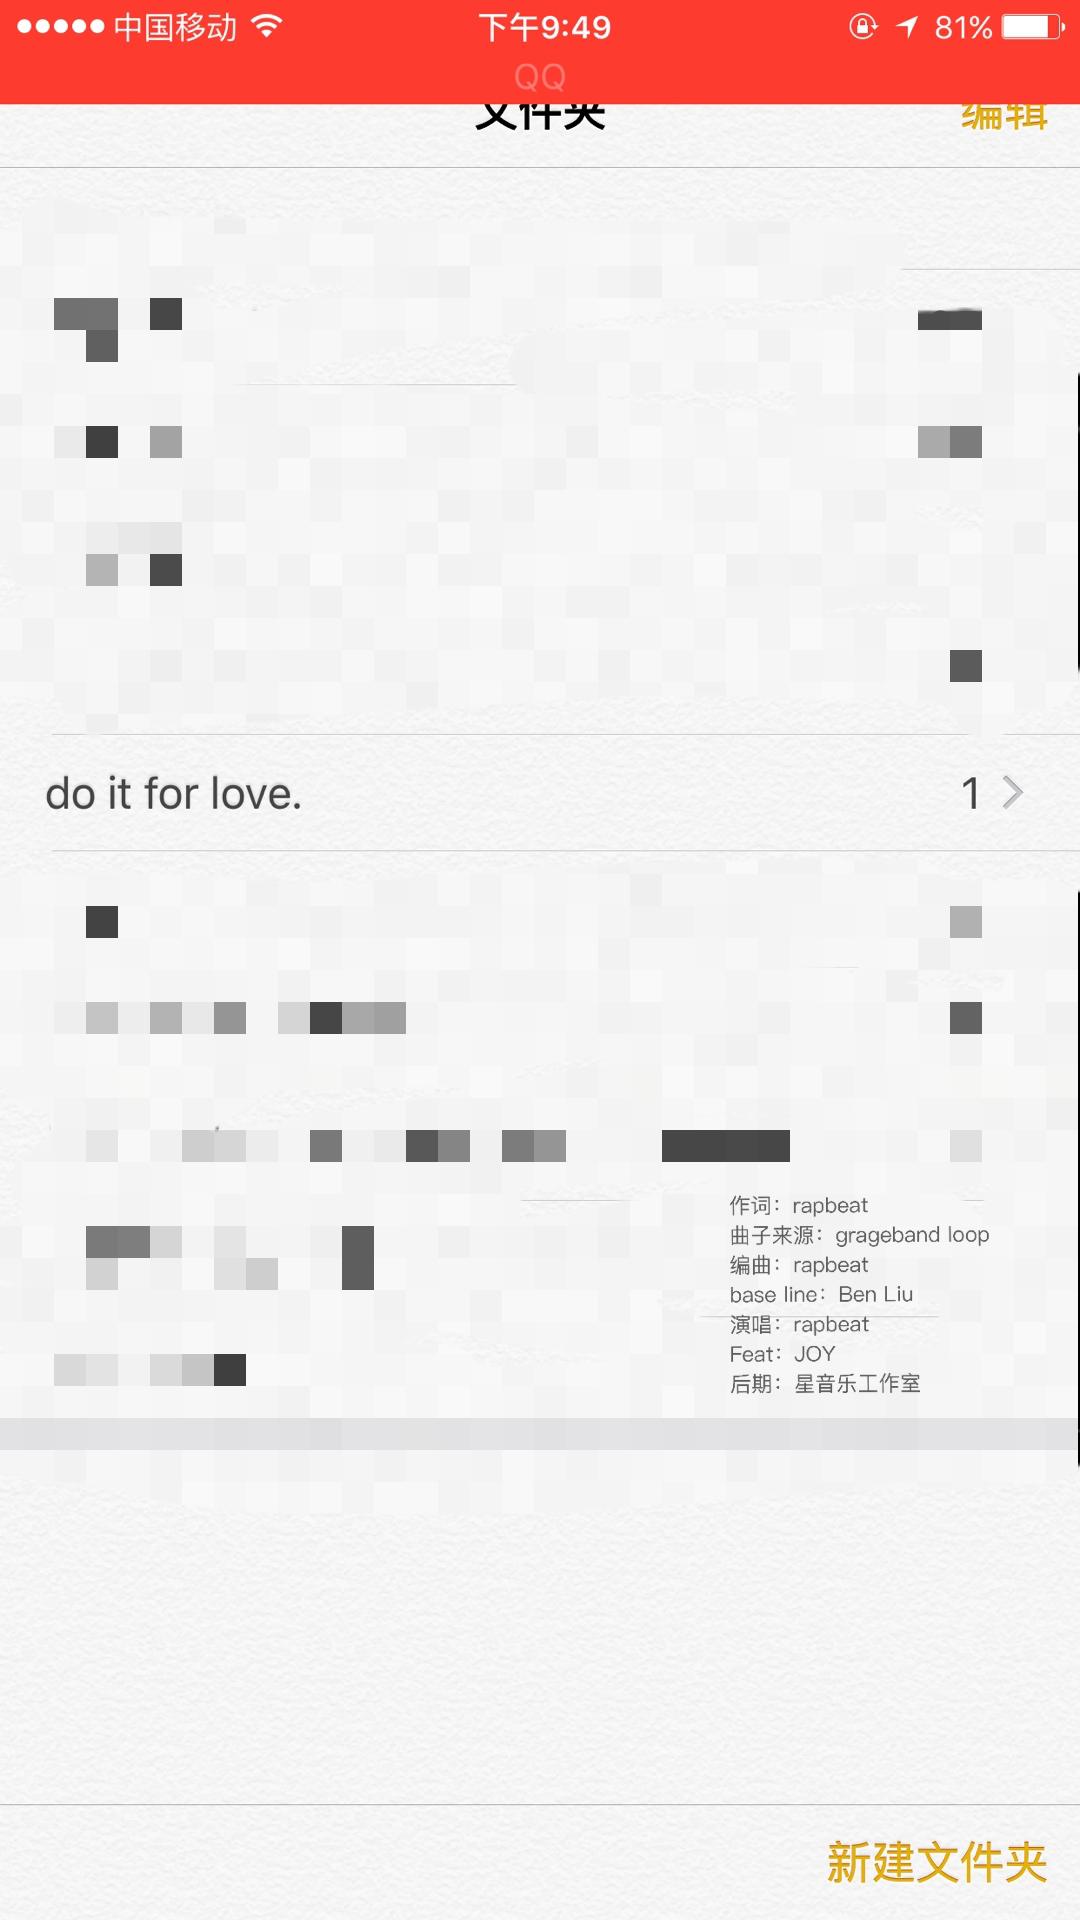 DIFL(Do It for Love) Prod. by Rapbeat专辑